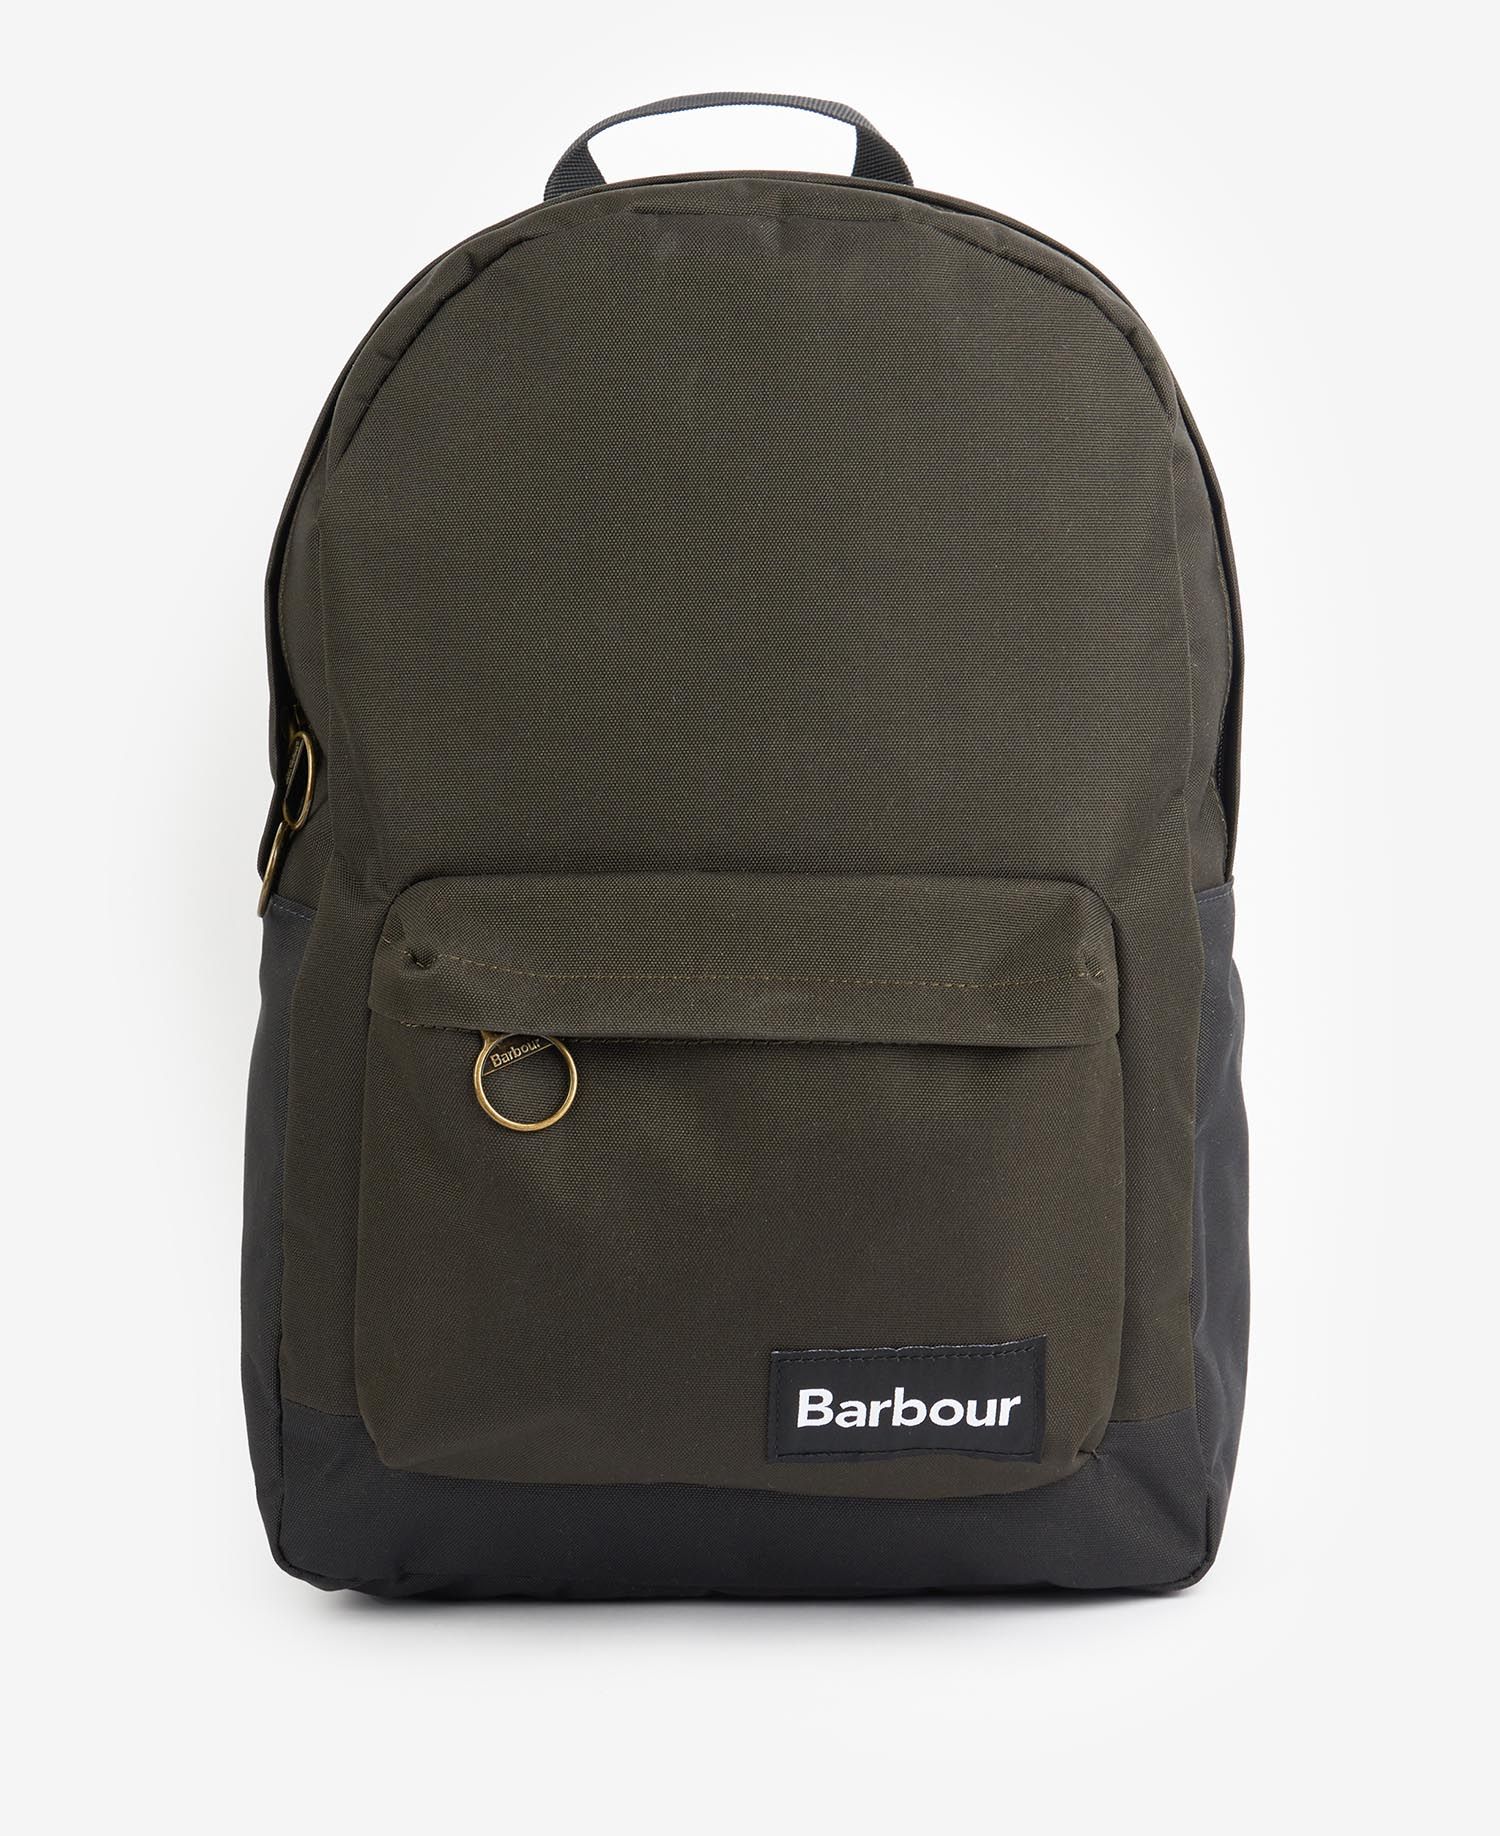 Shop the Barbour Highfield Canvas Backpack in Navy/Olive | Barbour